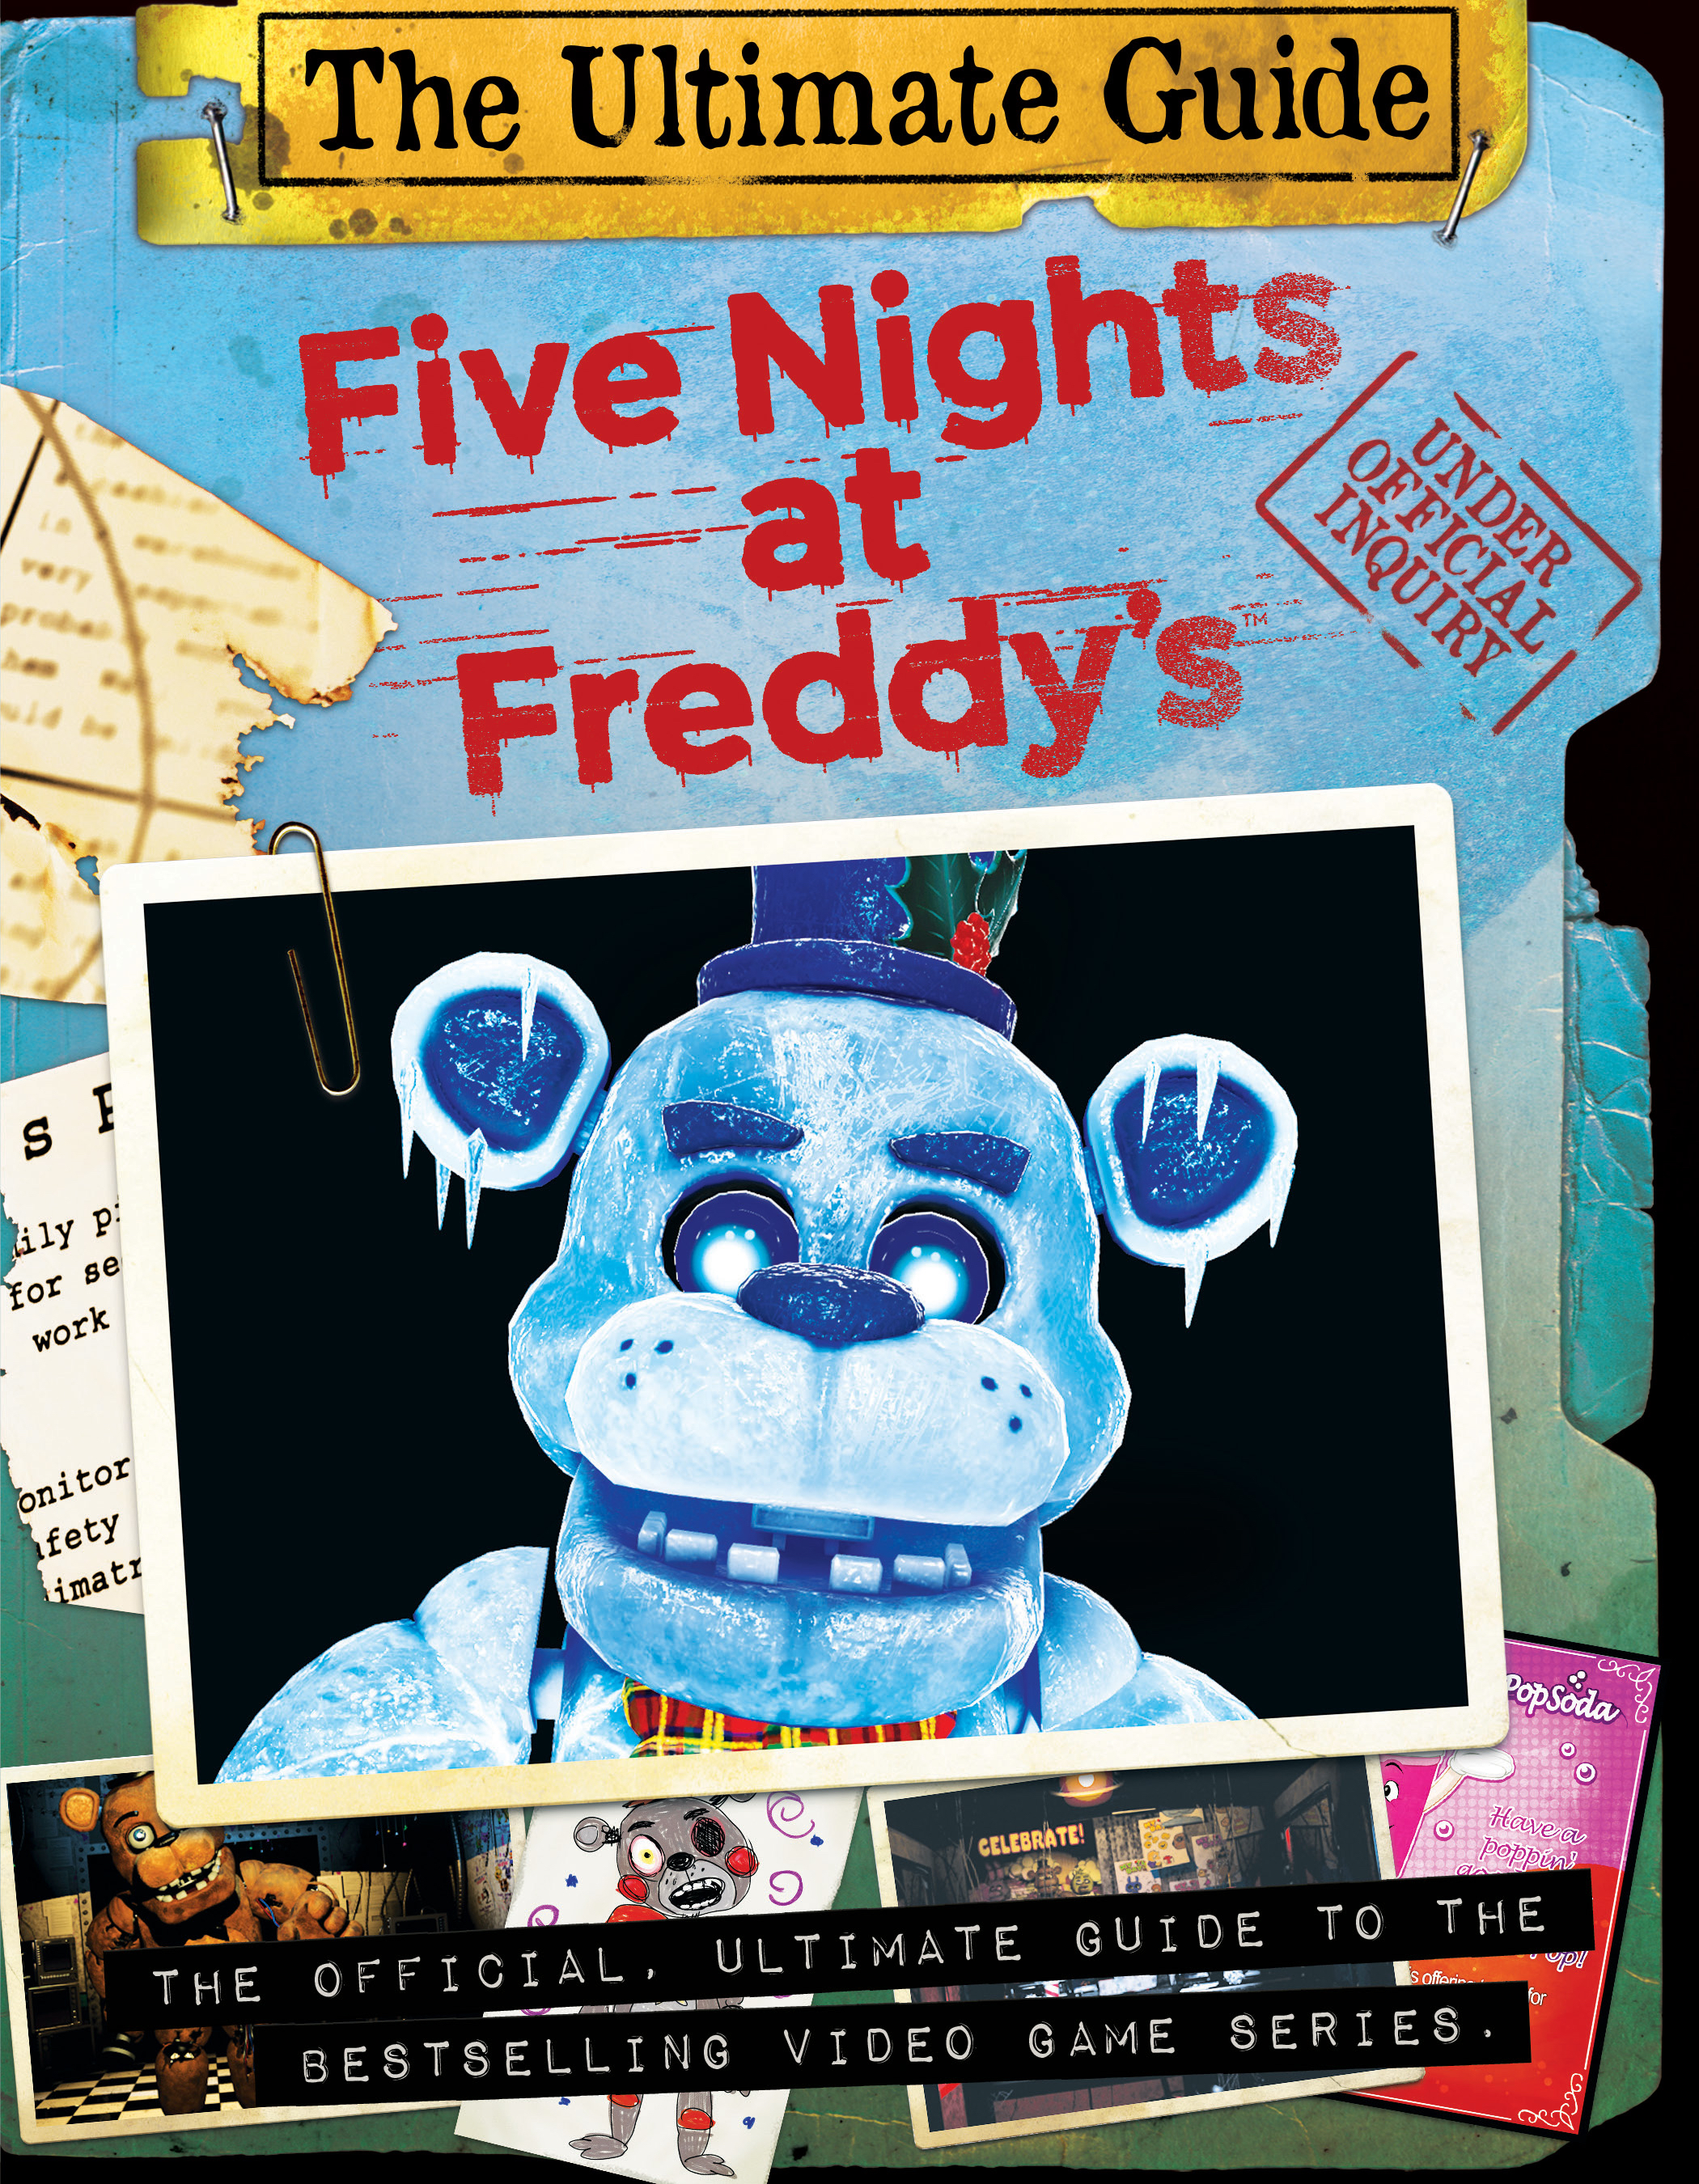 FIVE NIGHTS AT FREDDY'S - Movieguide